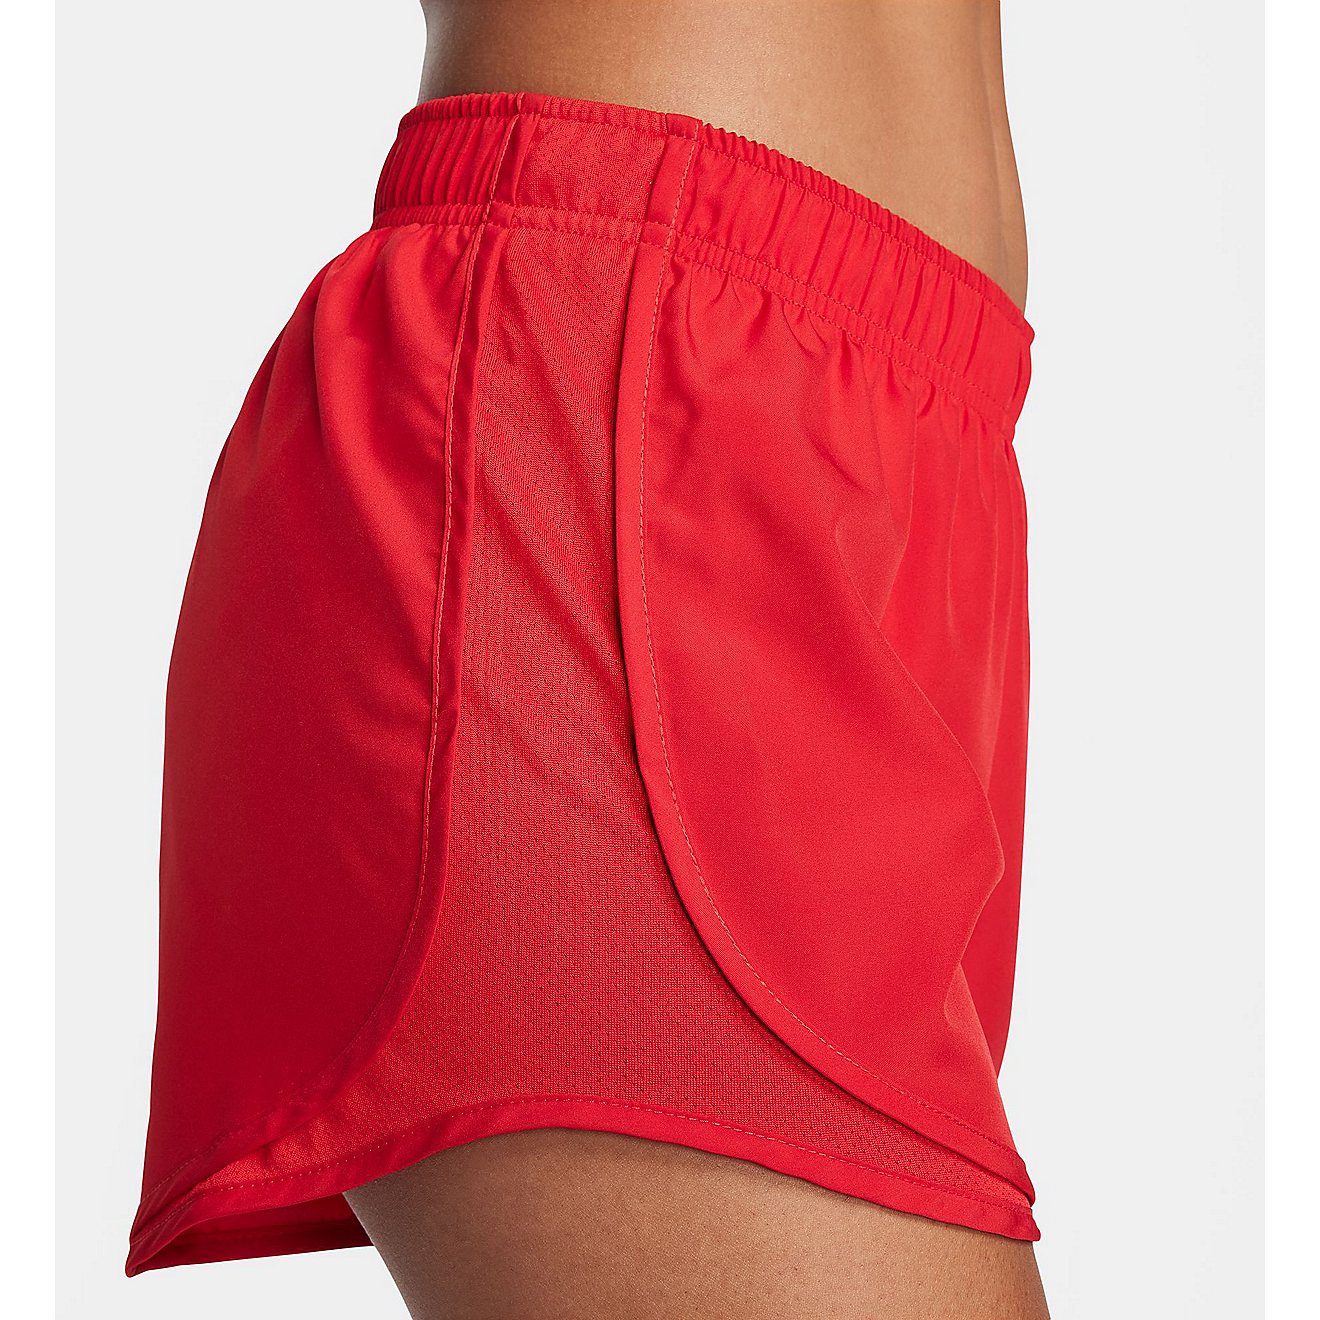 Nike Women's Tempo Dri-FIT Running Shorts                                                                                        - view number 3